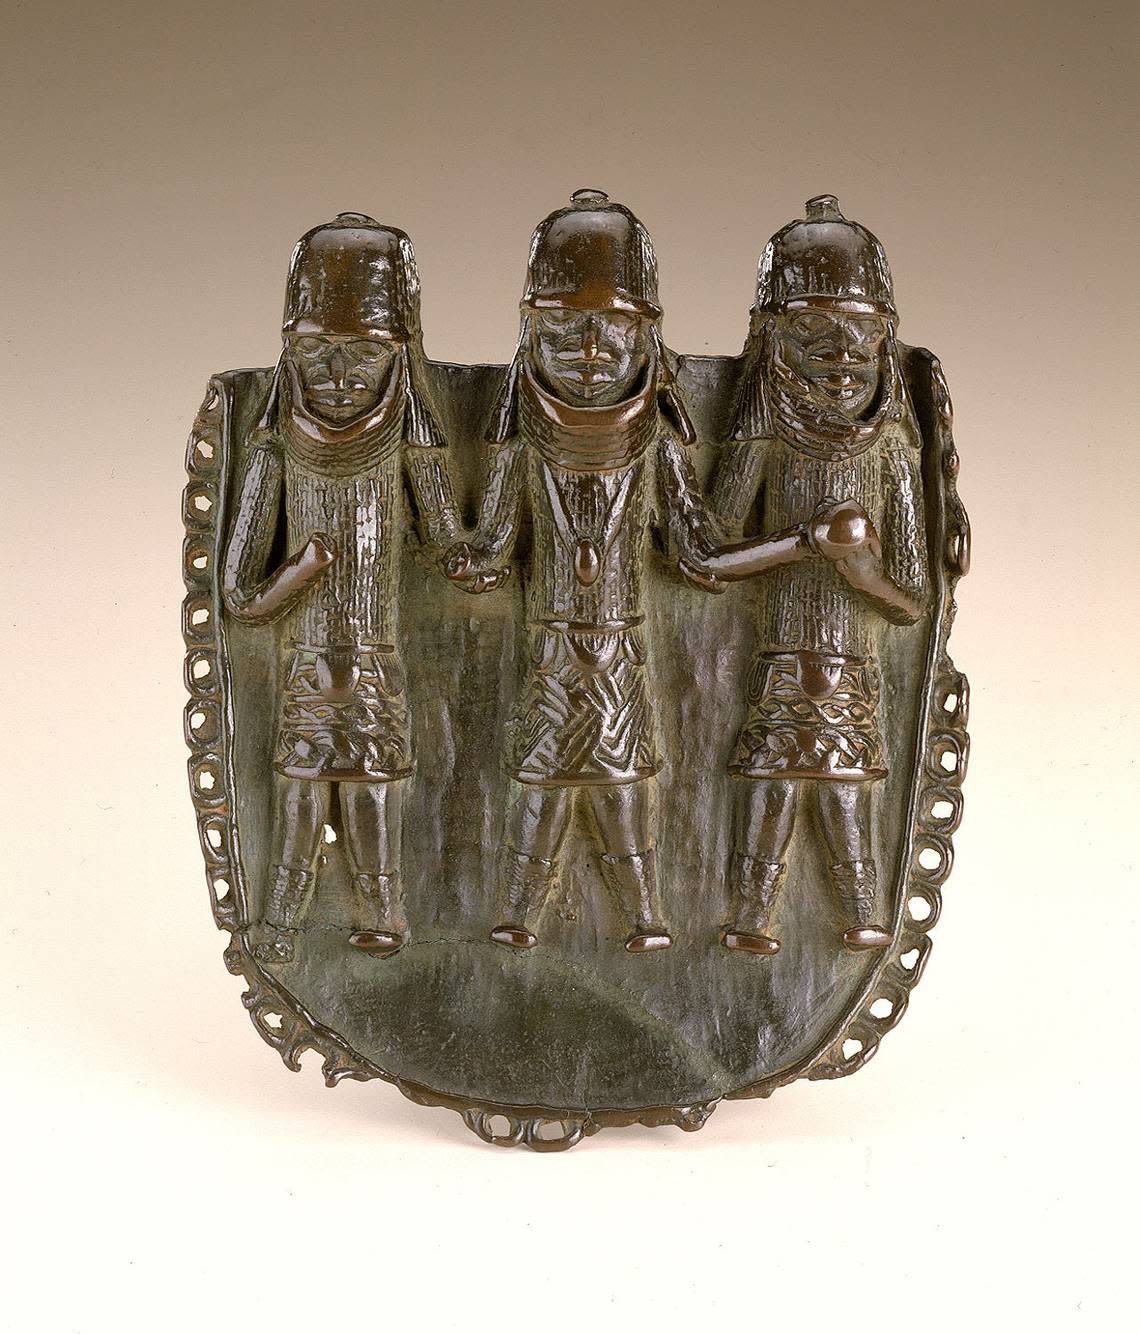 Copper pendant with three figures, the oba (king) in the center and attendants on either side.